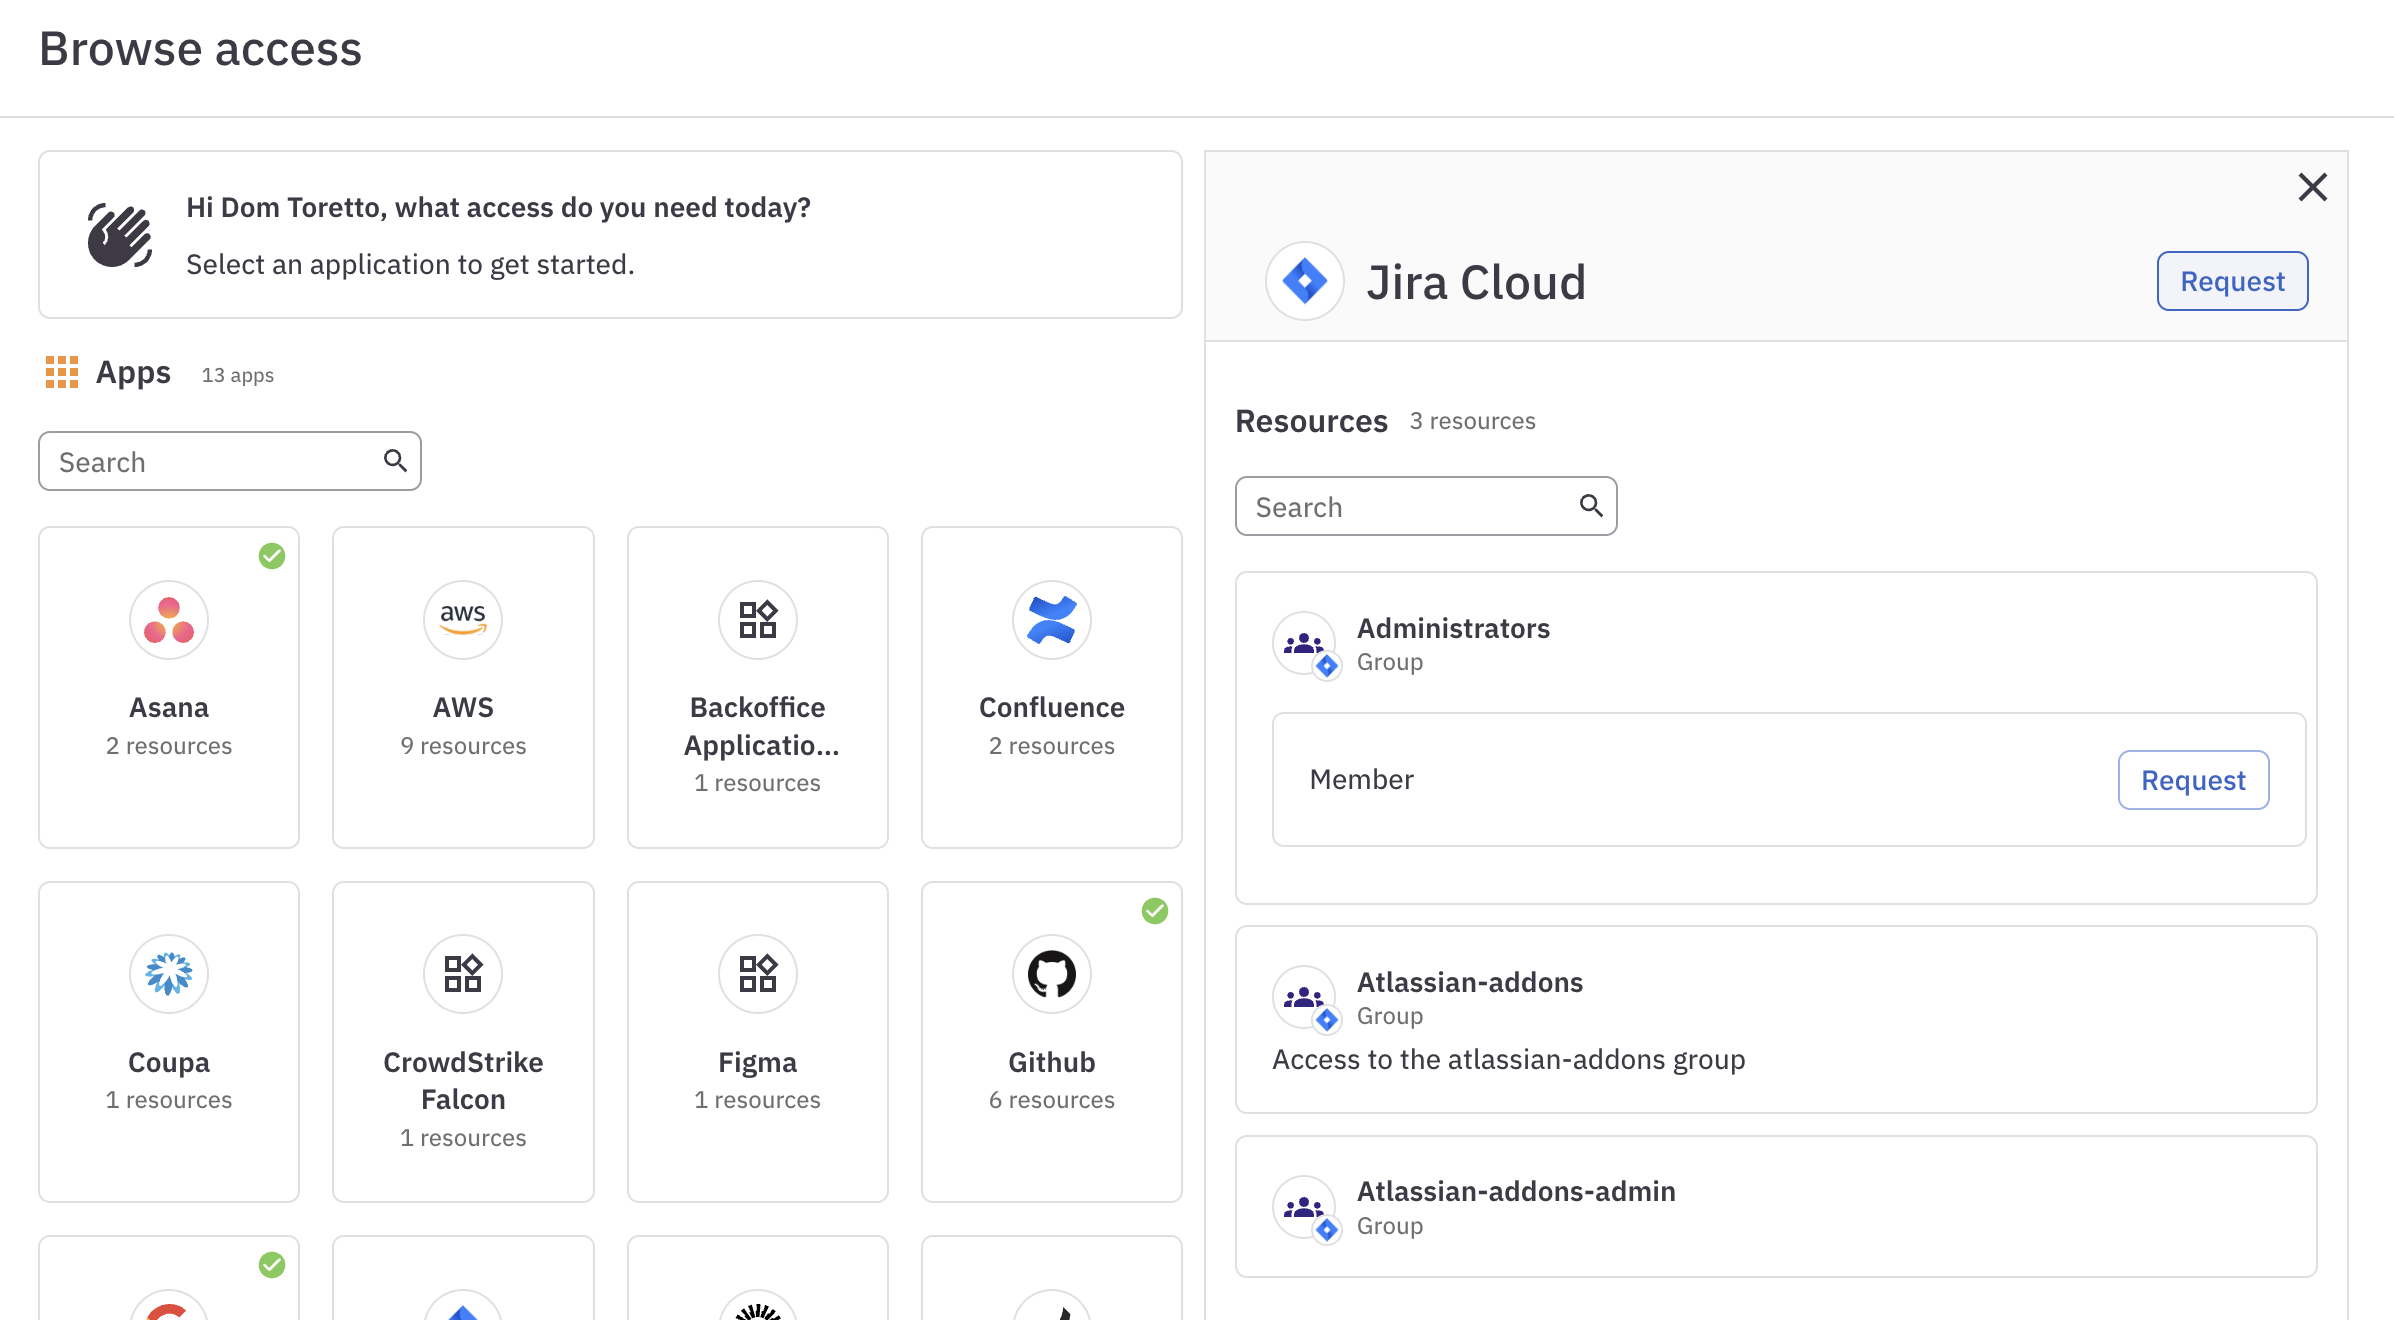 A detail from the Browse access page showing Request buttons next to Jira Cloud in the header of the page (click here to request access to the app itself) and next to the Member entitlement on the Administrators group (click here to request this specific entitlement).